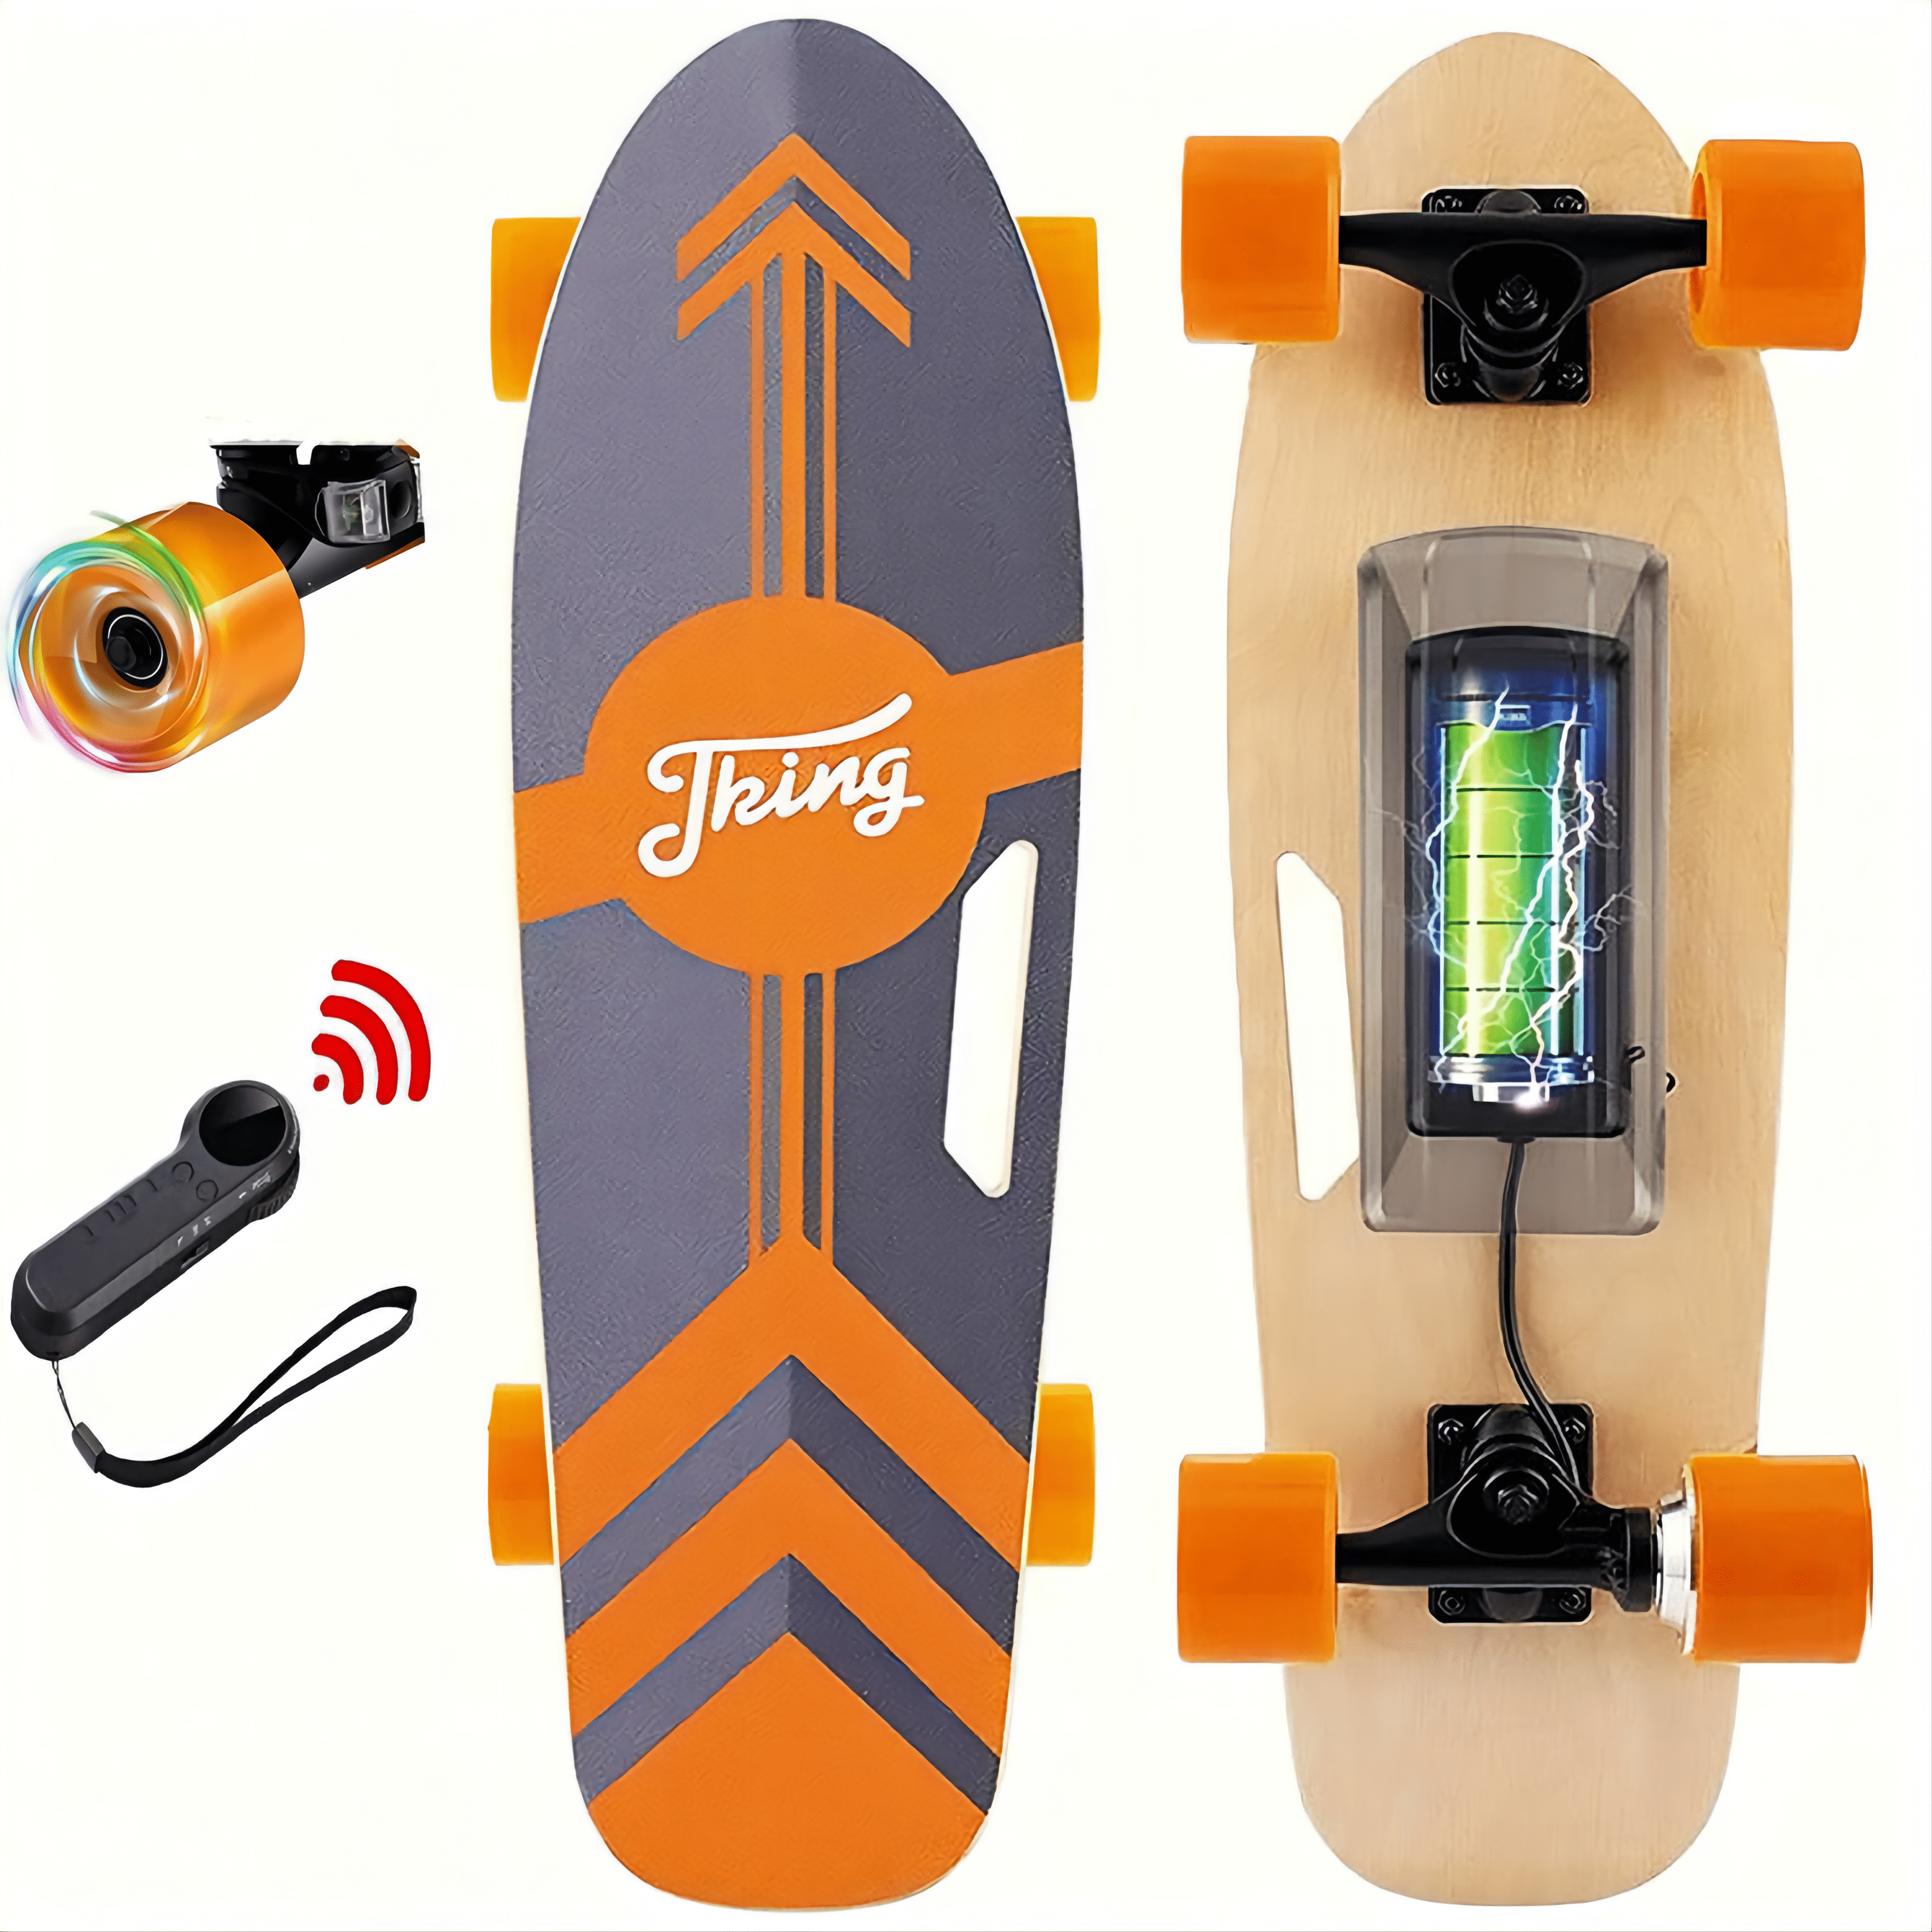 Details about   CAROMA Electric Skateboard Power Motor Cruiser Maple Deck With Wireless Remote; 